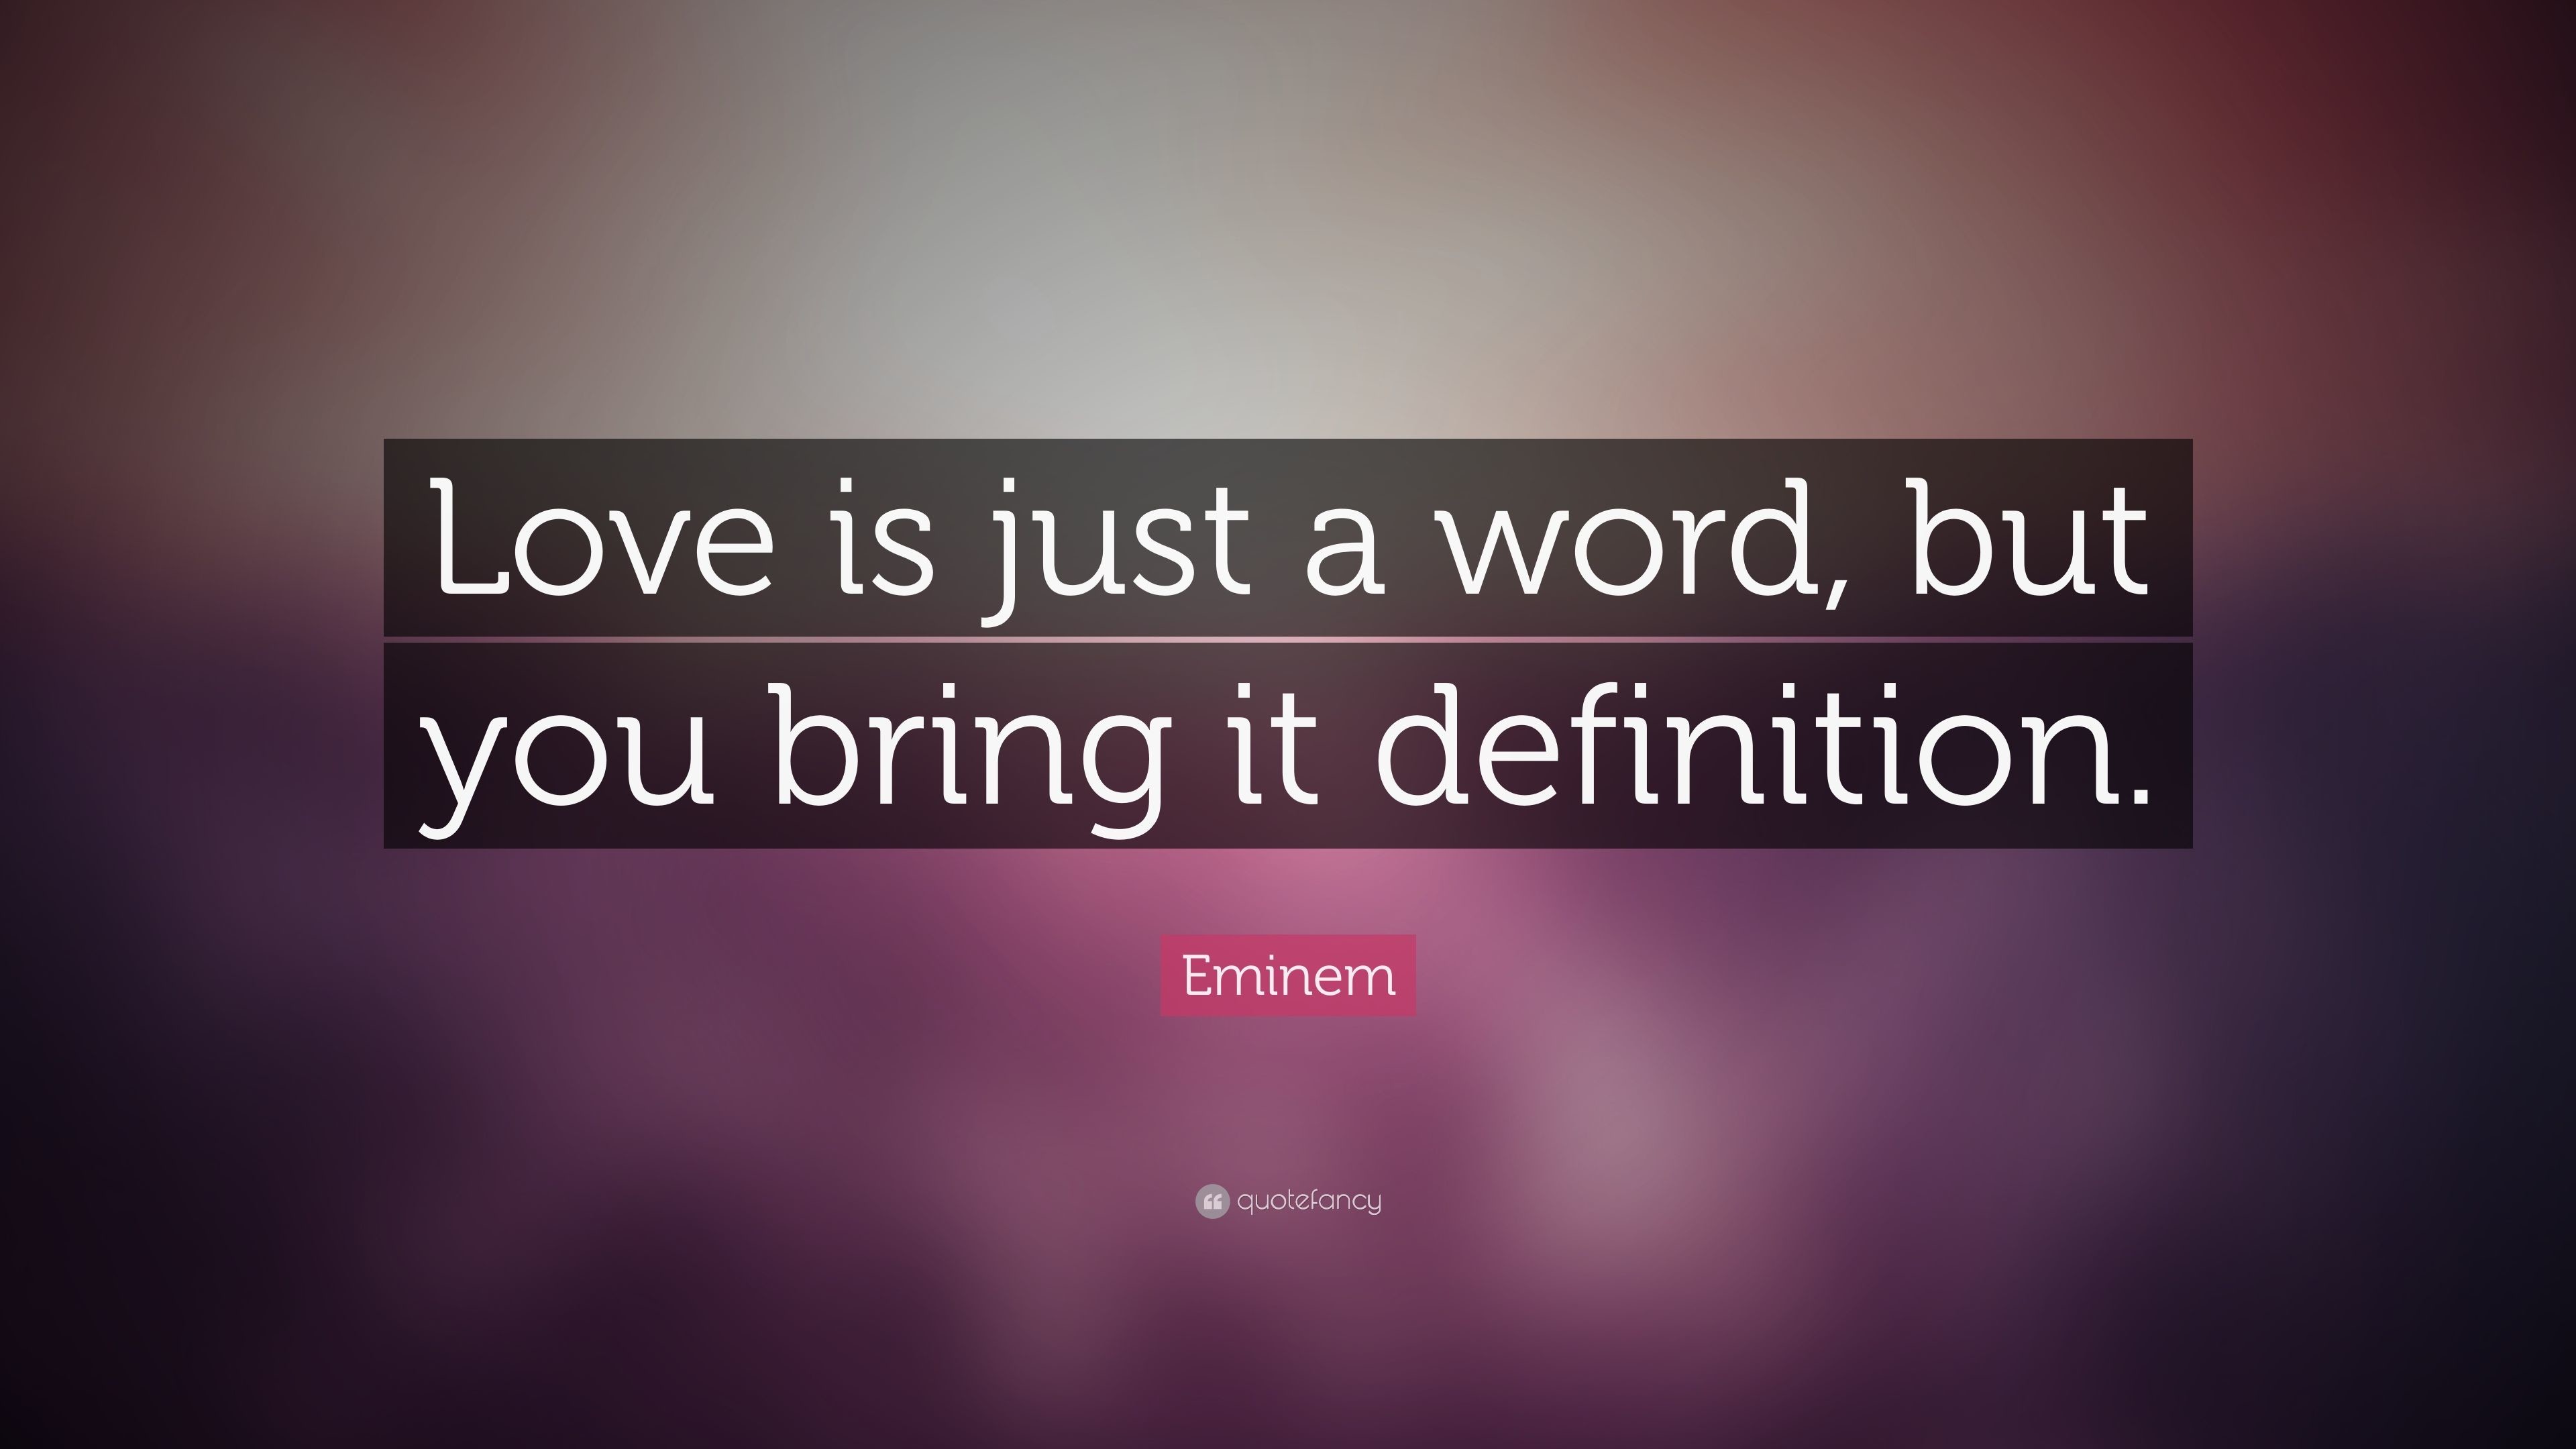 3840x2160 Eminem Quote: “Love is just a word, but you bring it definition .